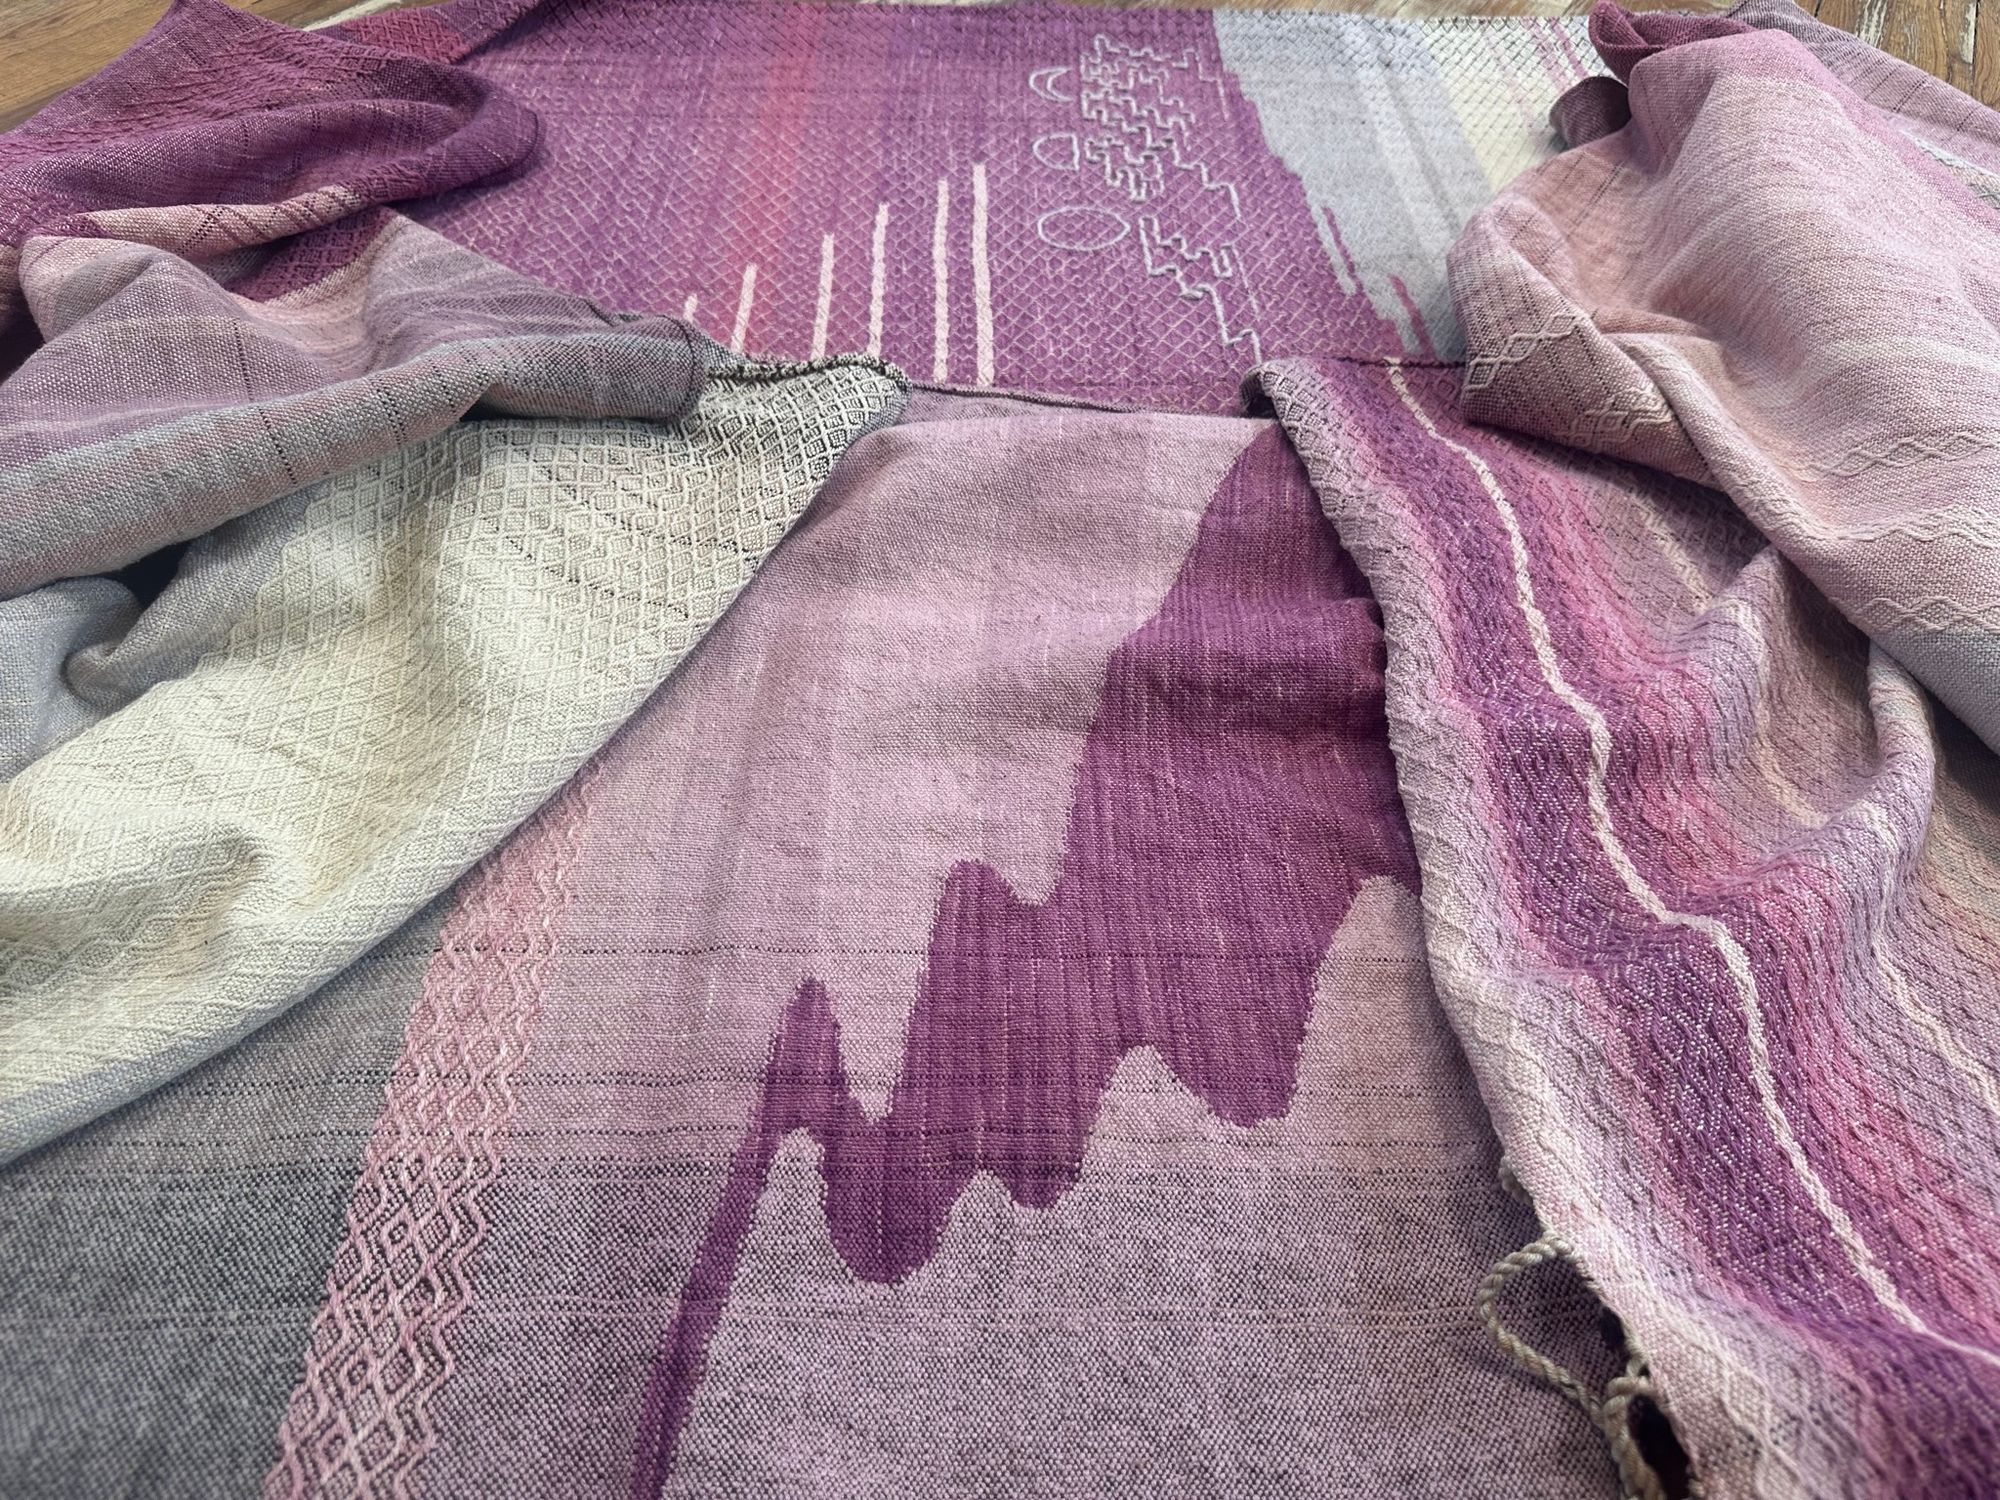 Handwoven fabric lays on a wooden floor in a gallery space. The fabric is naturally dyed with cochineal in all shades of pink and fuchsia with a design of a river and three moons on it